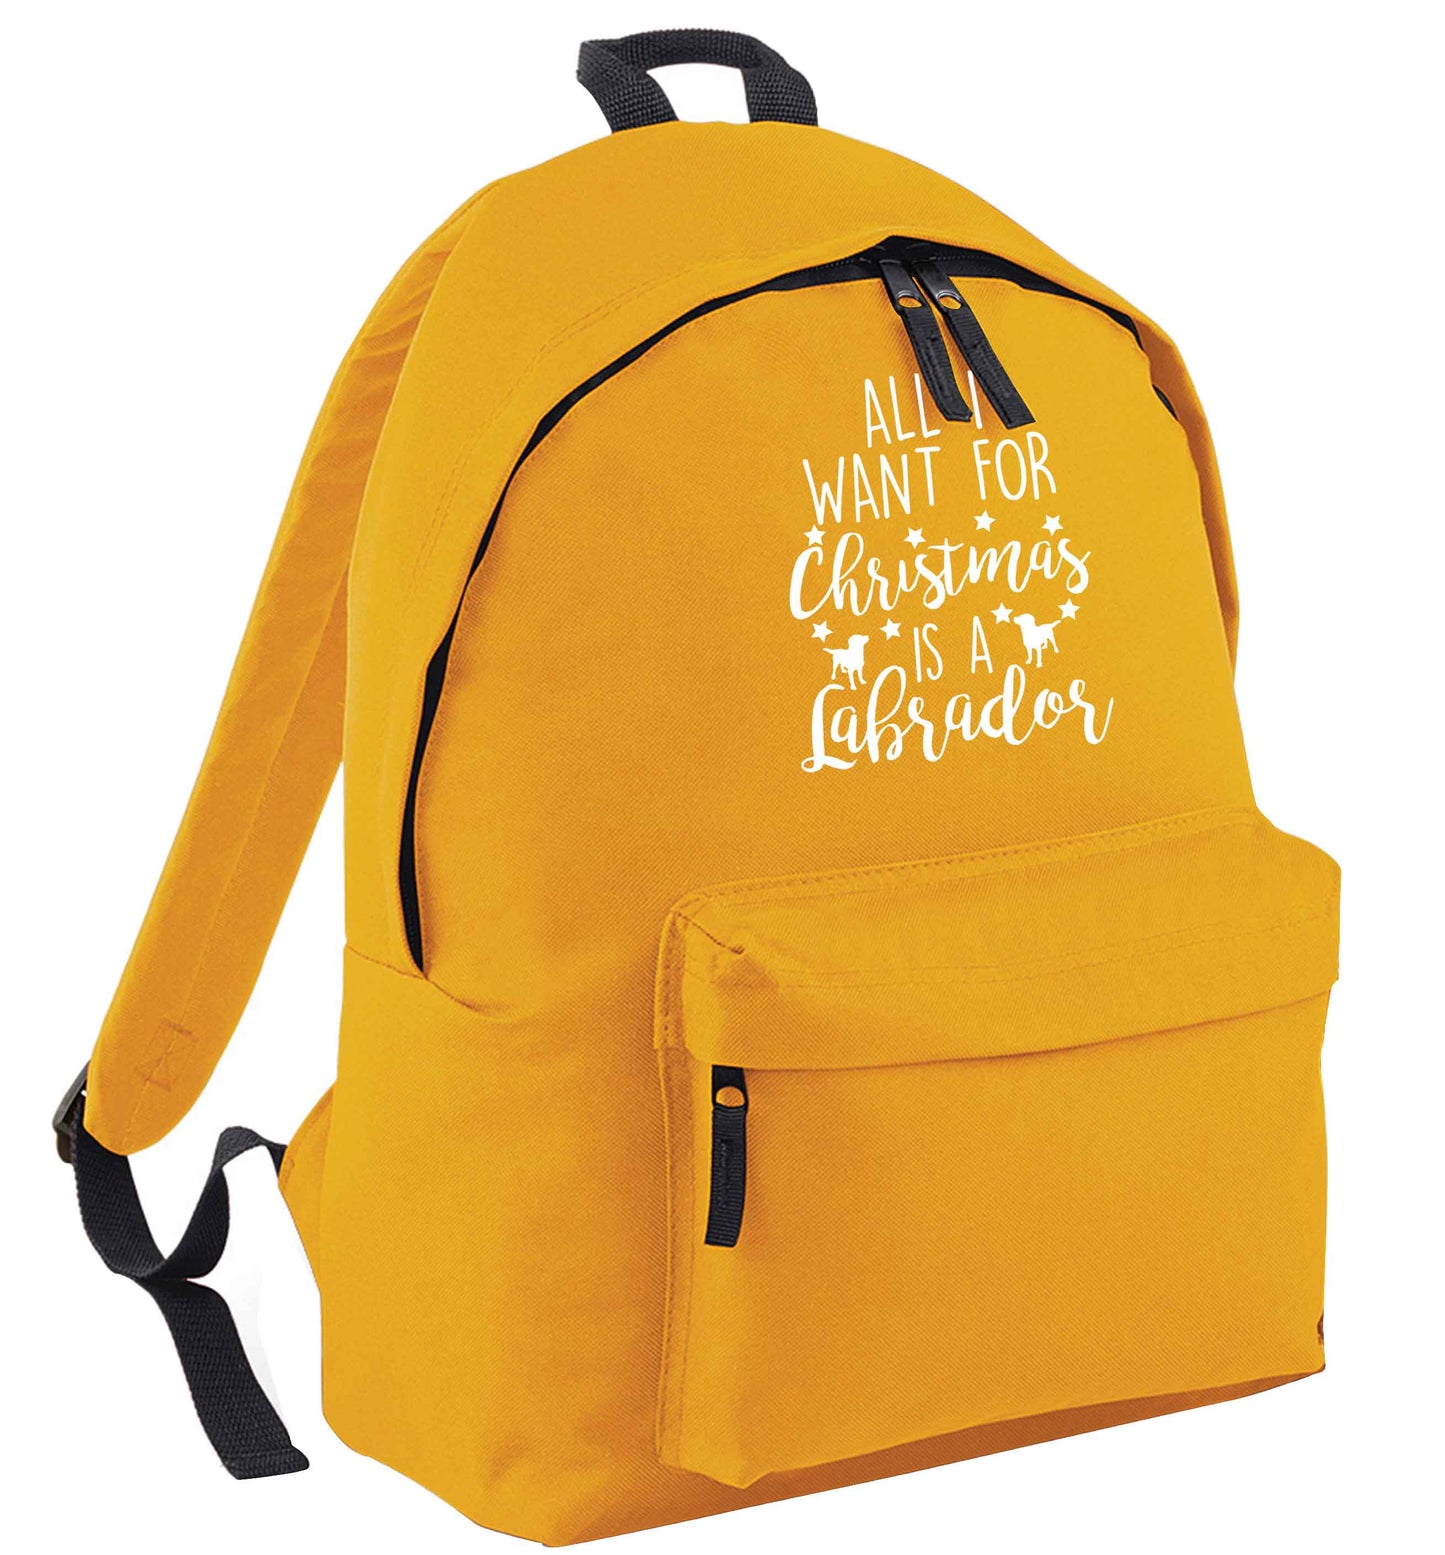 All I want for Christmas is a labrador mustard adults backpack